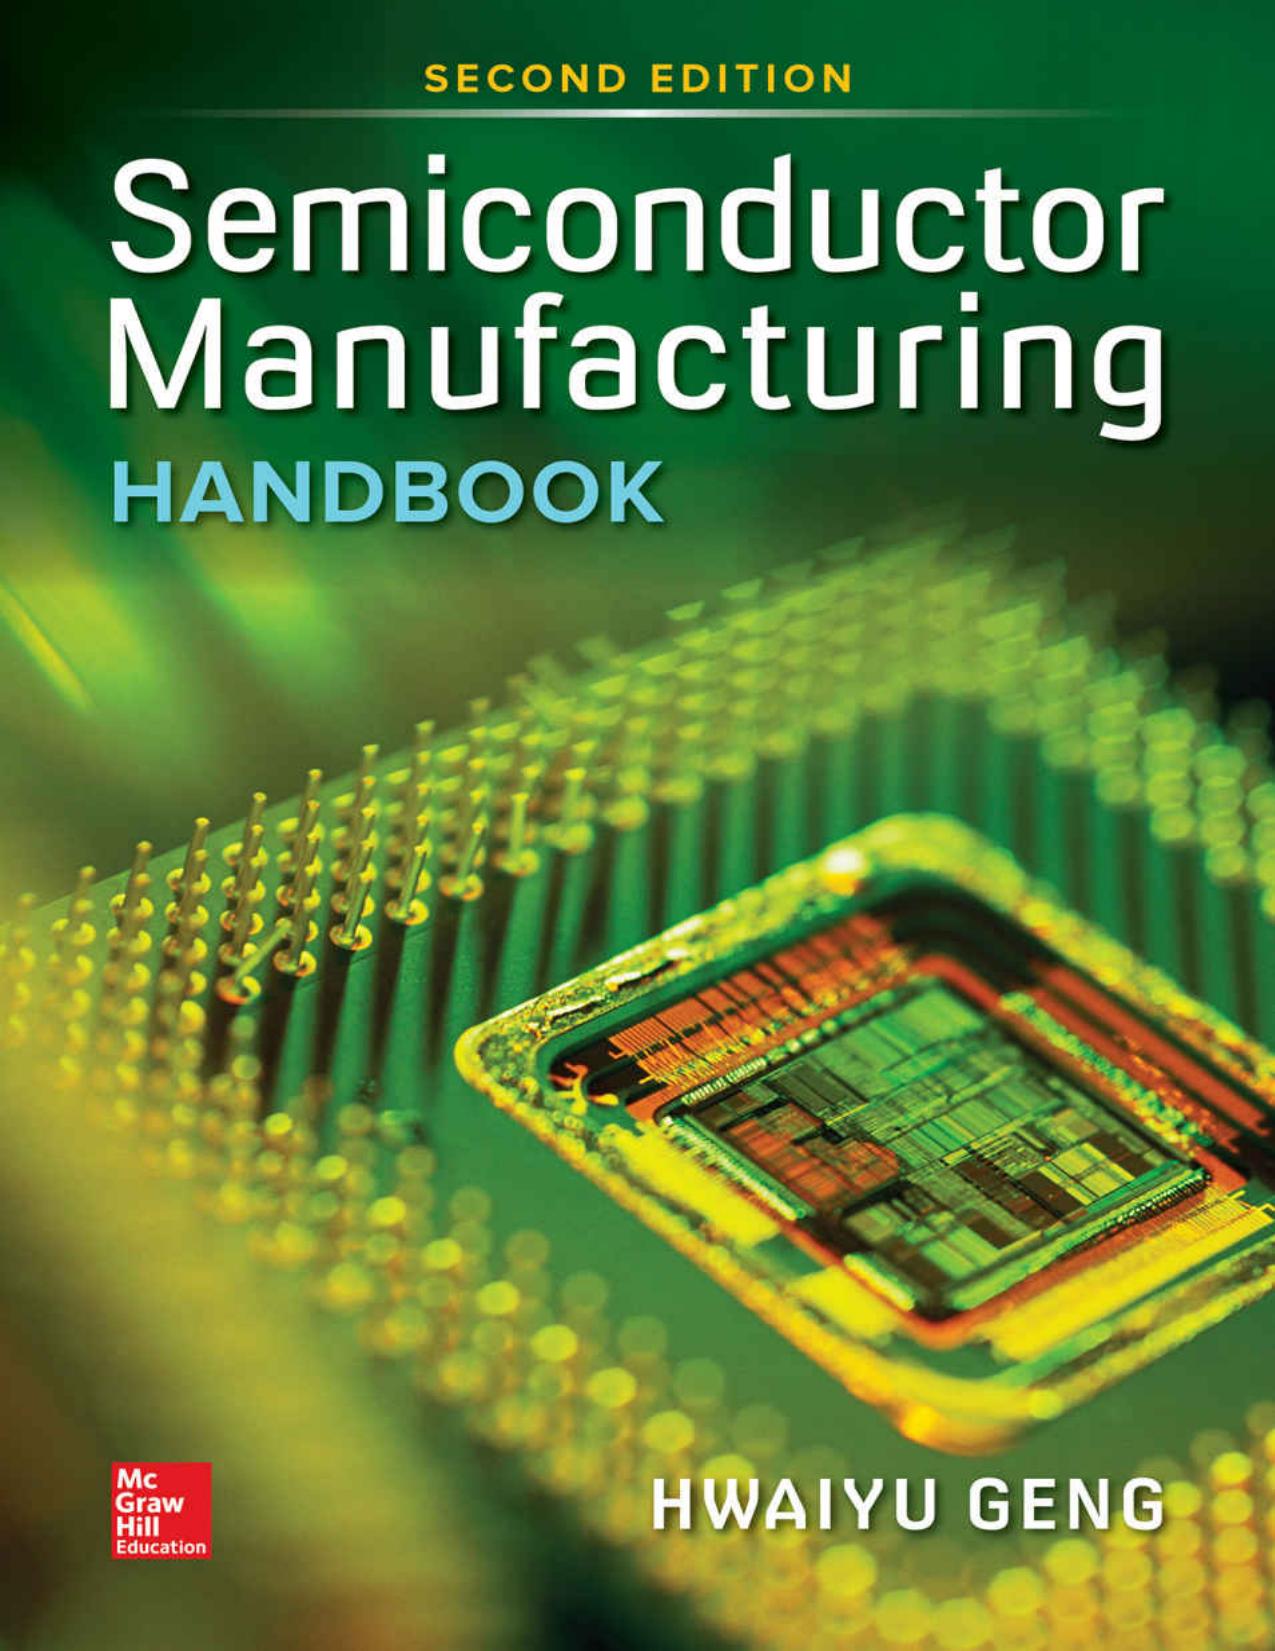 Semiconductor Manufacturing Handbook, Second Edition